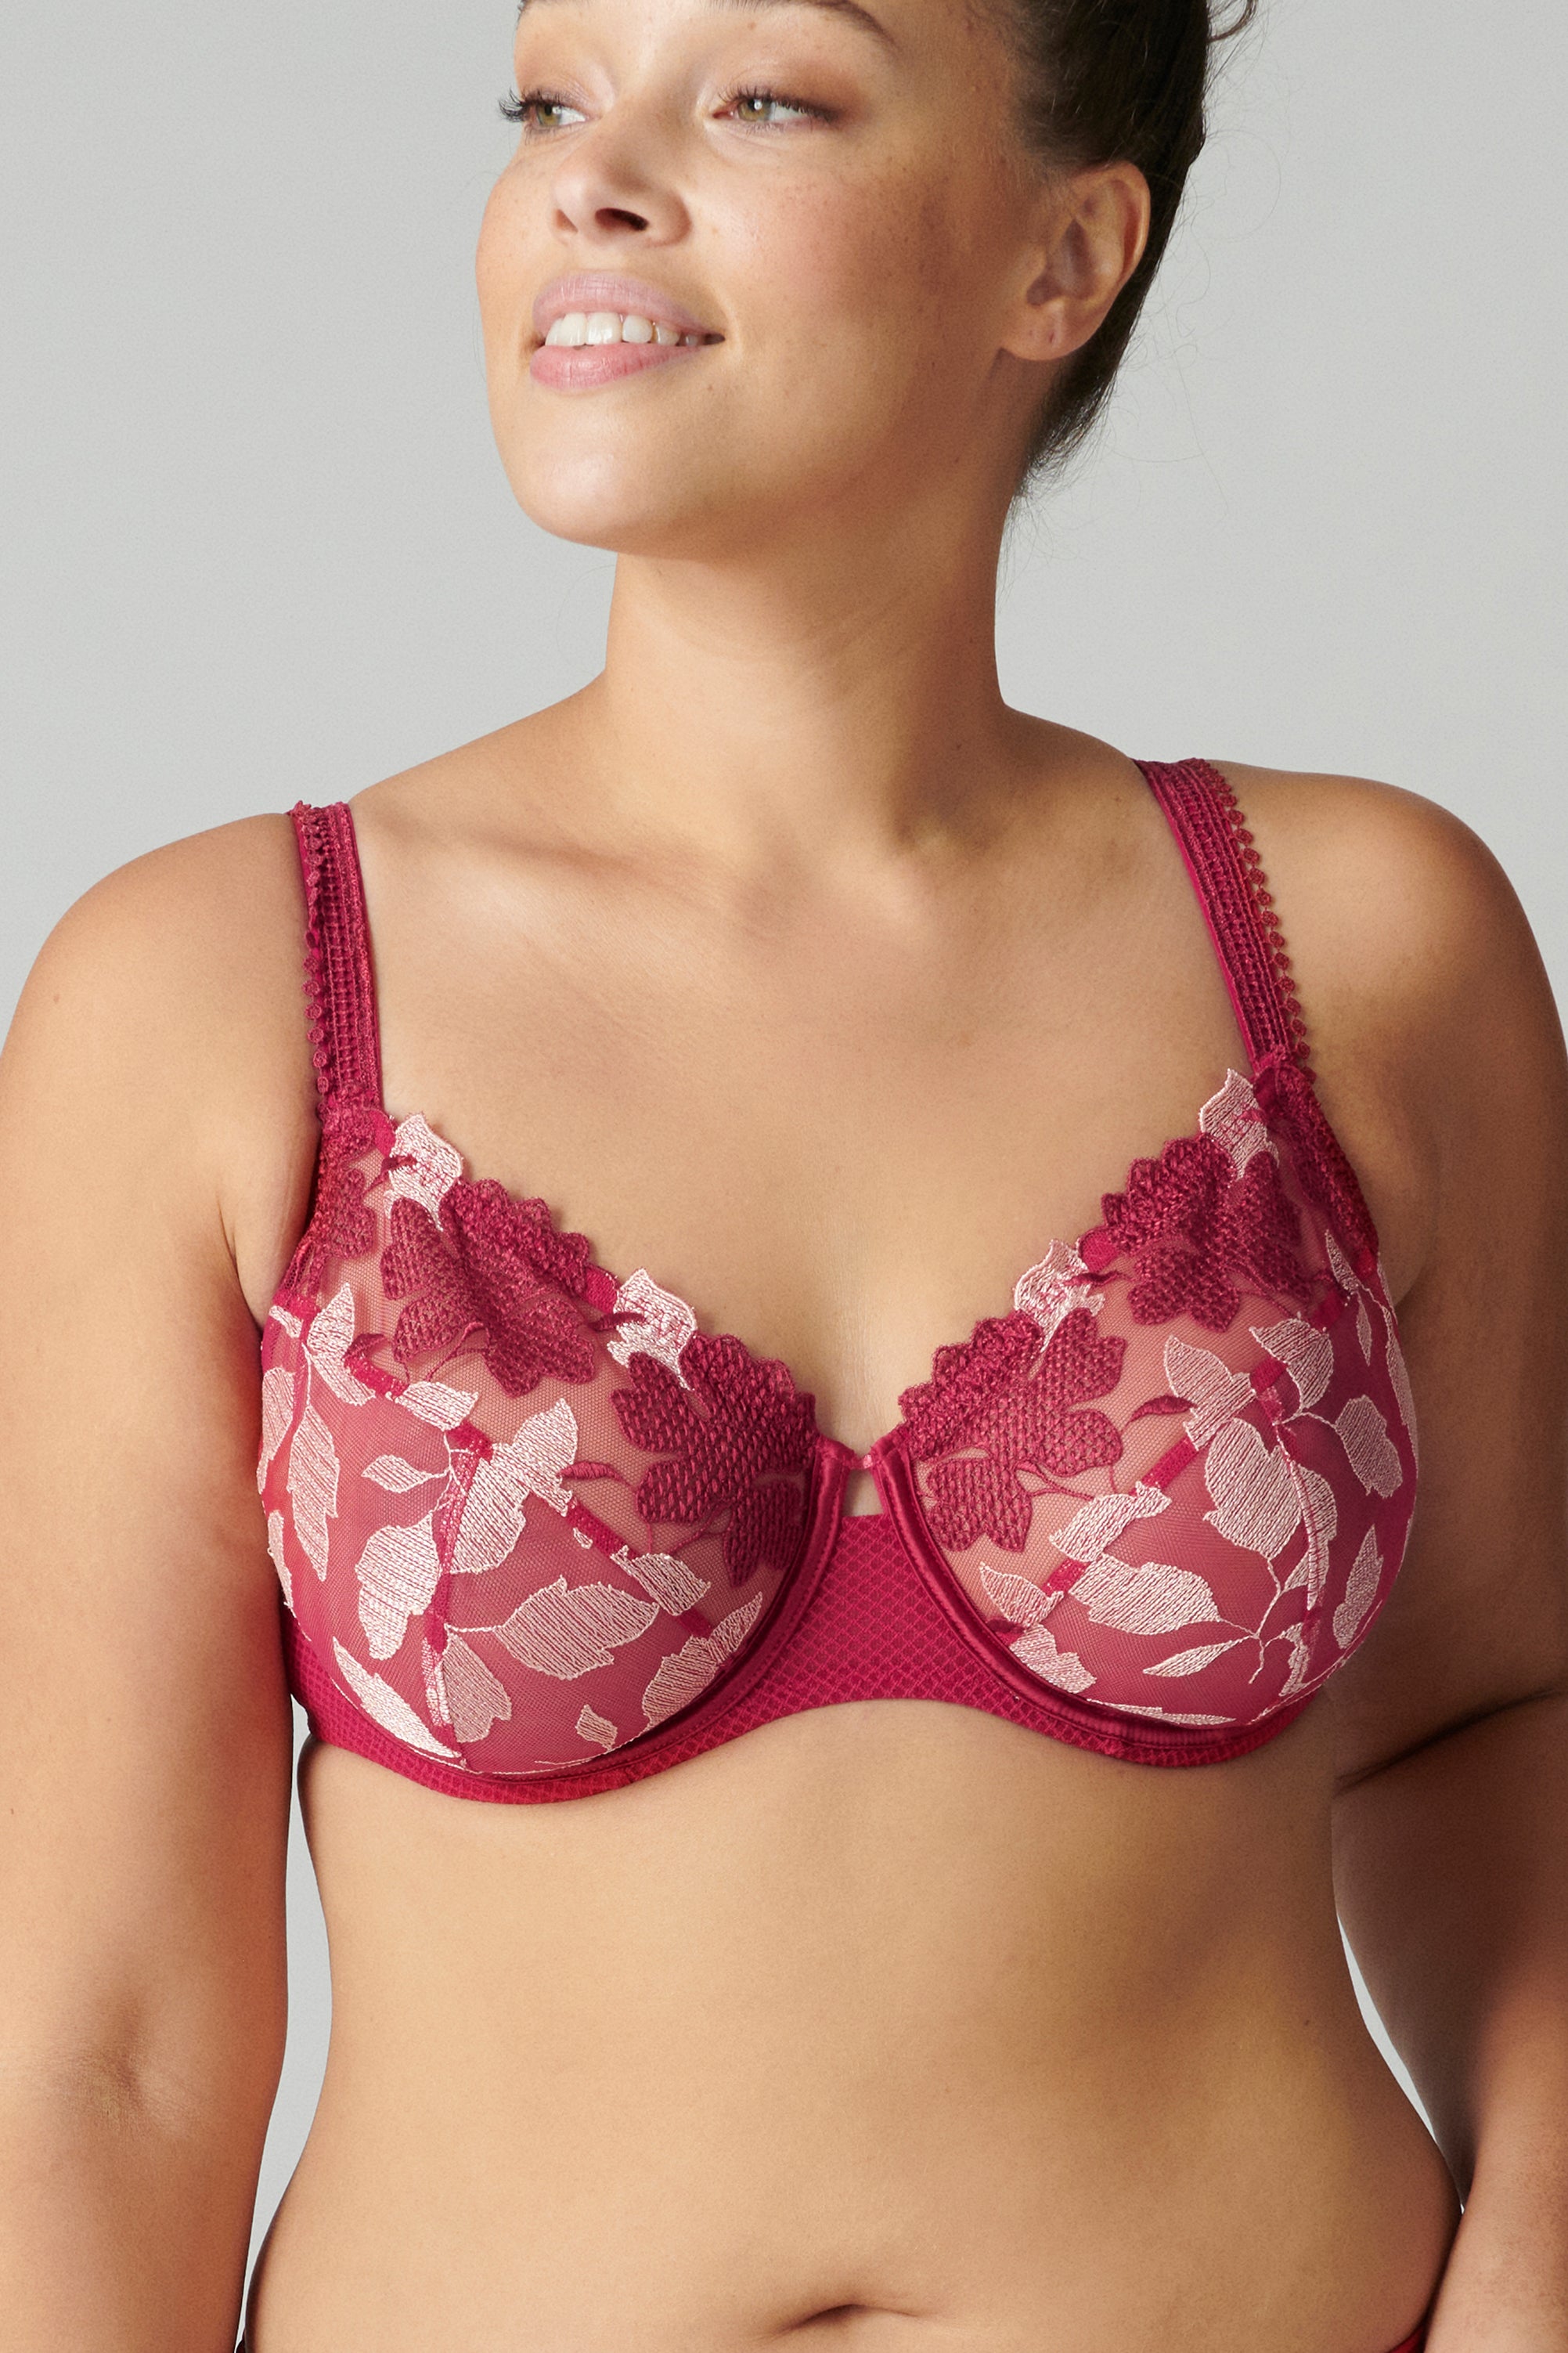 Women Bras 6 pack of Bra with all lace D DD cup, Size 36D (S6304)